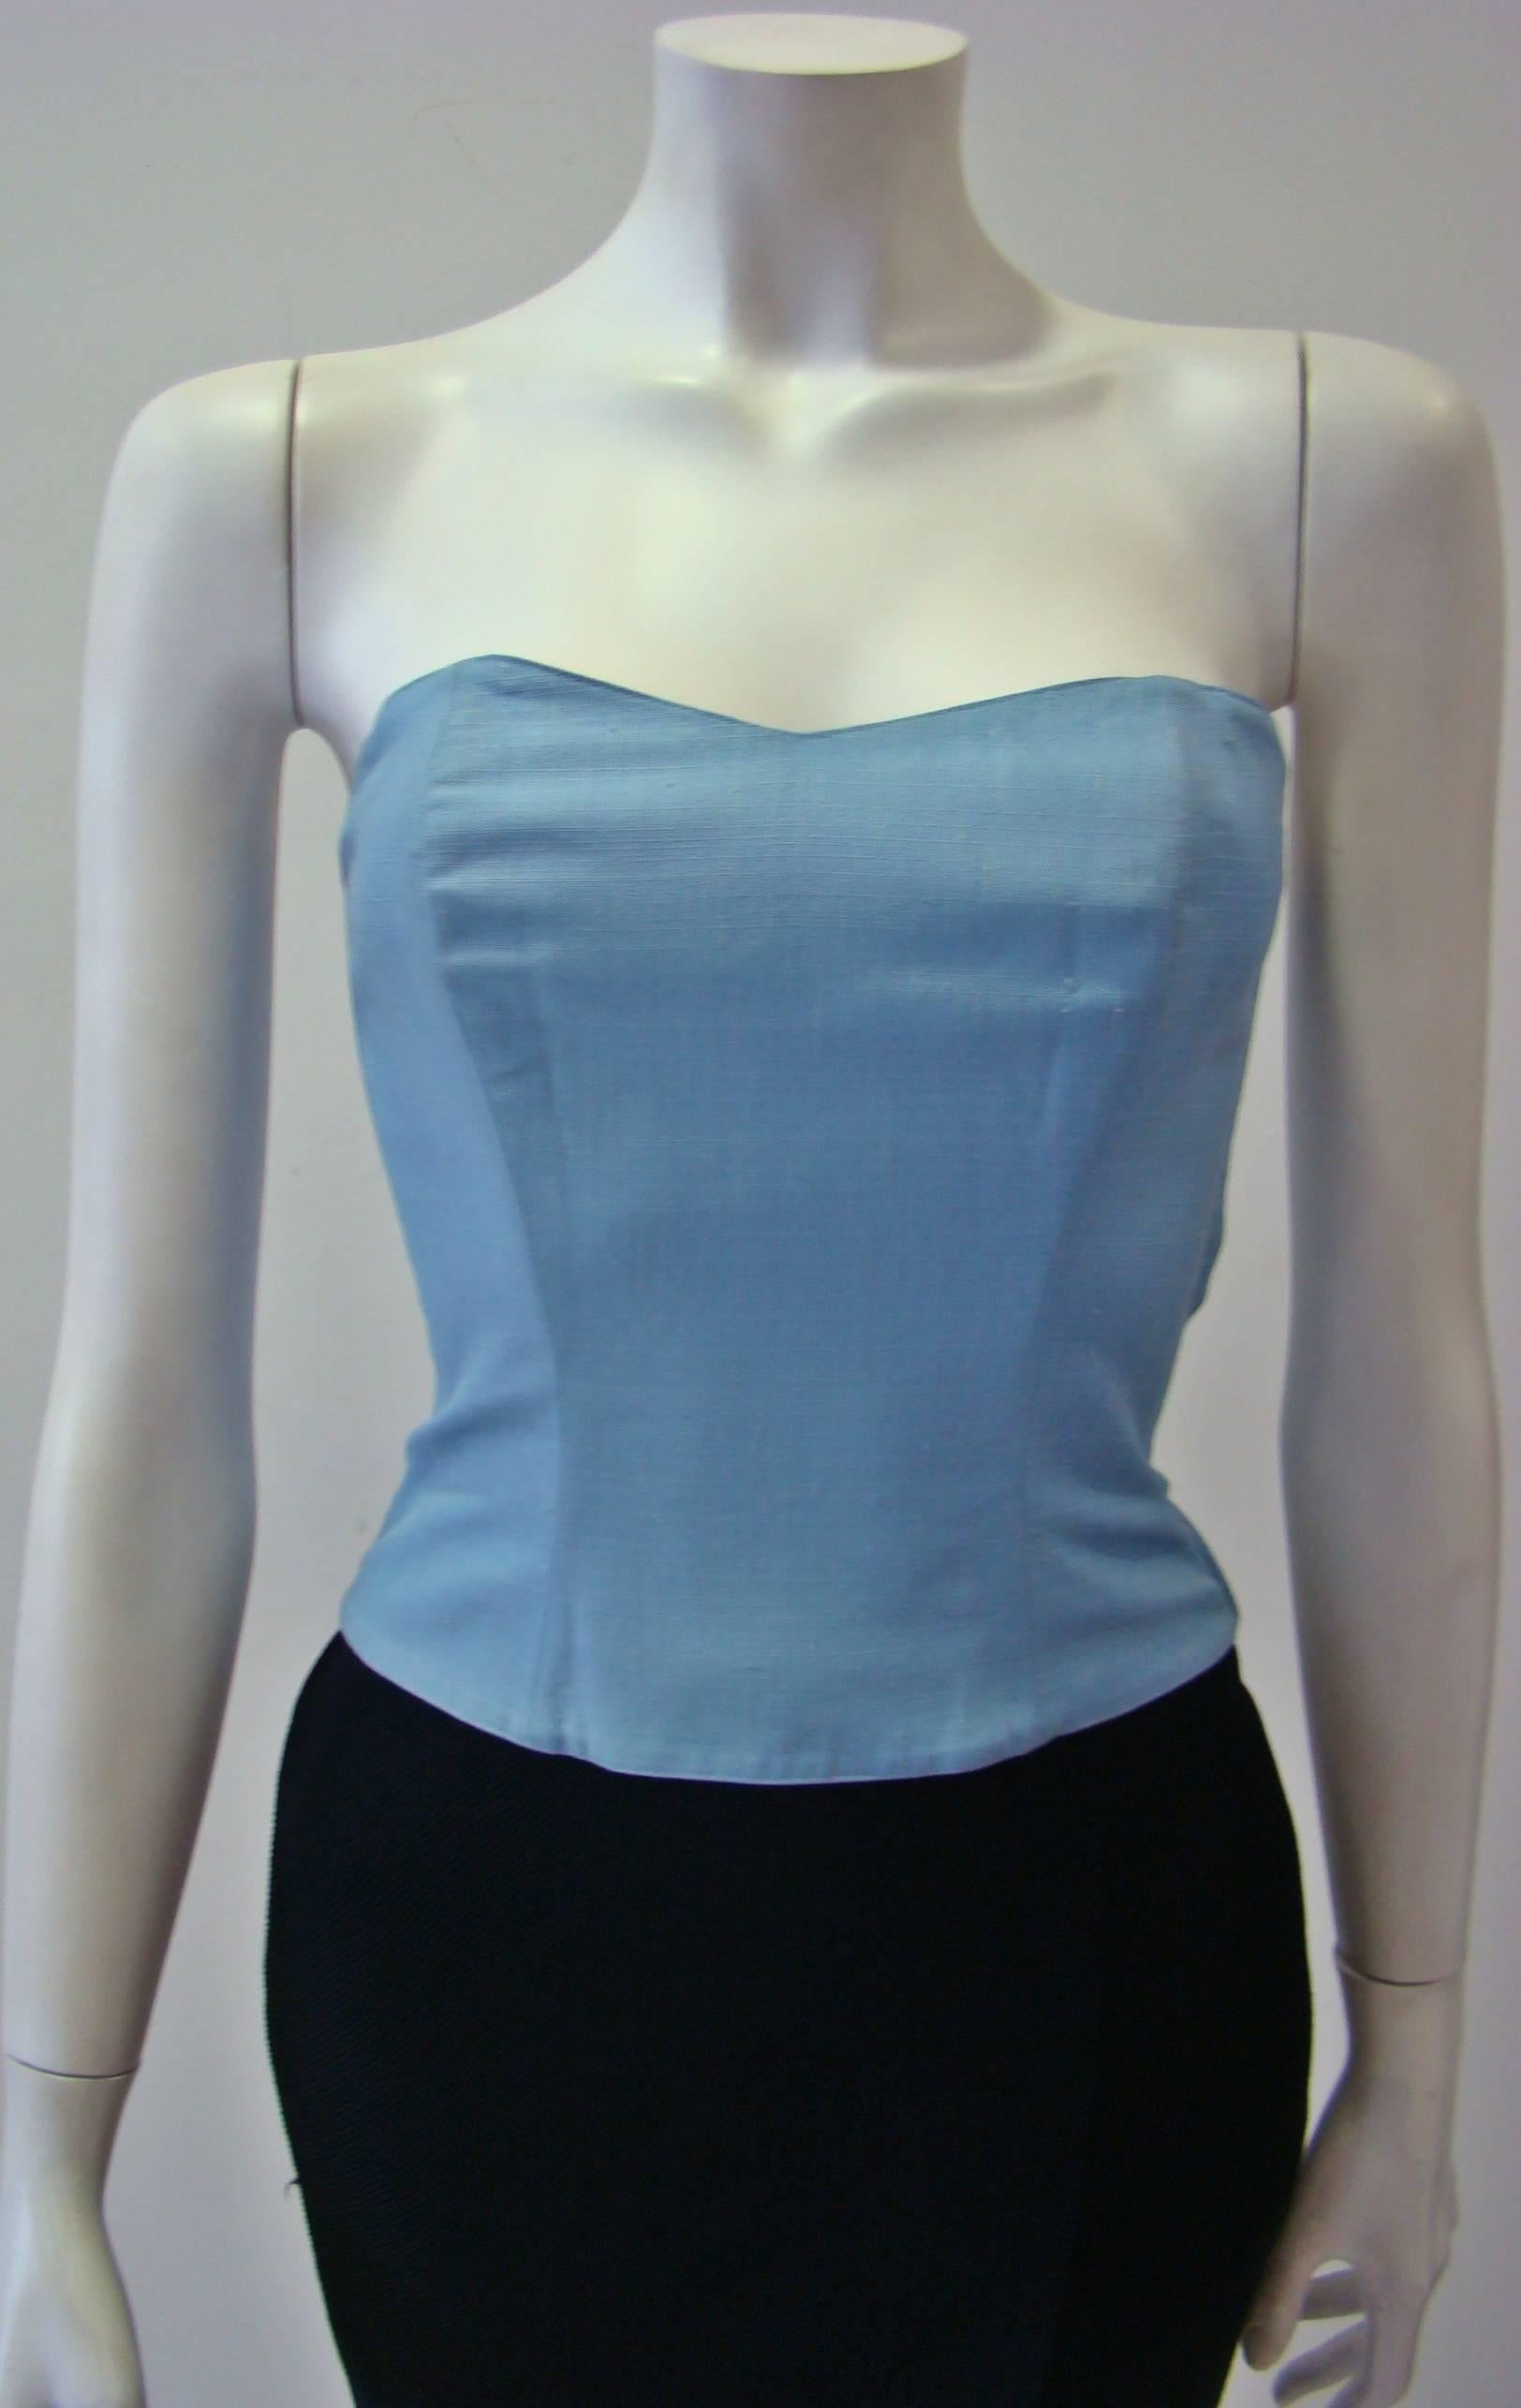 Gianfranco Ferre Blue Ciel Strapless Bustier In Excellent Condition For Sale In Athens, Agia Paraskevi